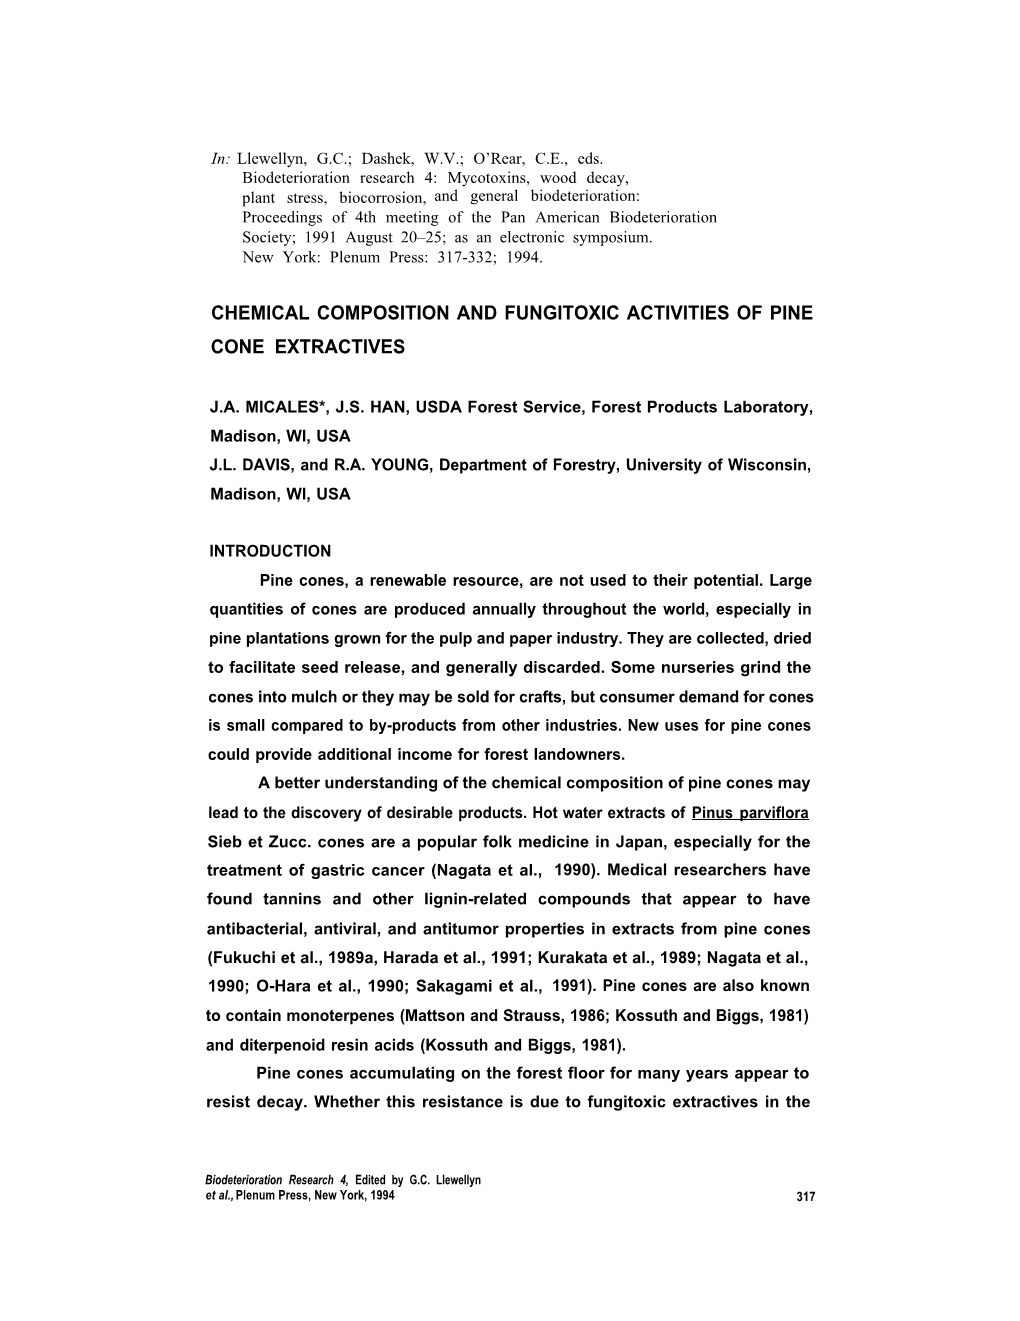 Chemical Composition and Fungitoxic Activities of Pine Cone Extractives